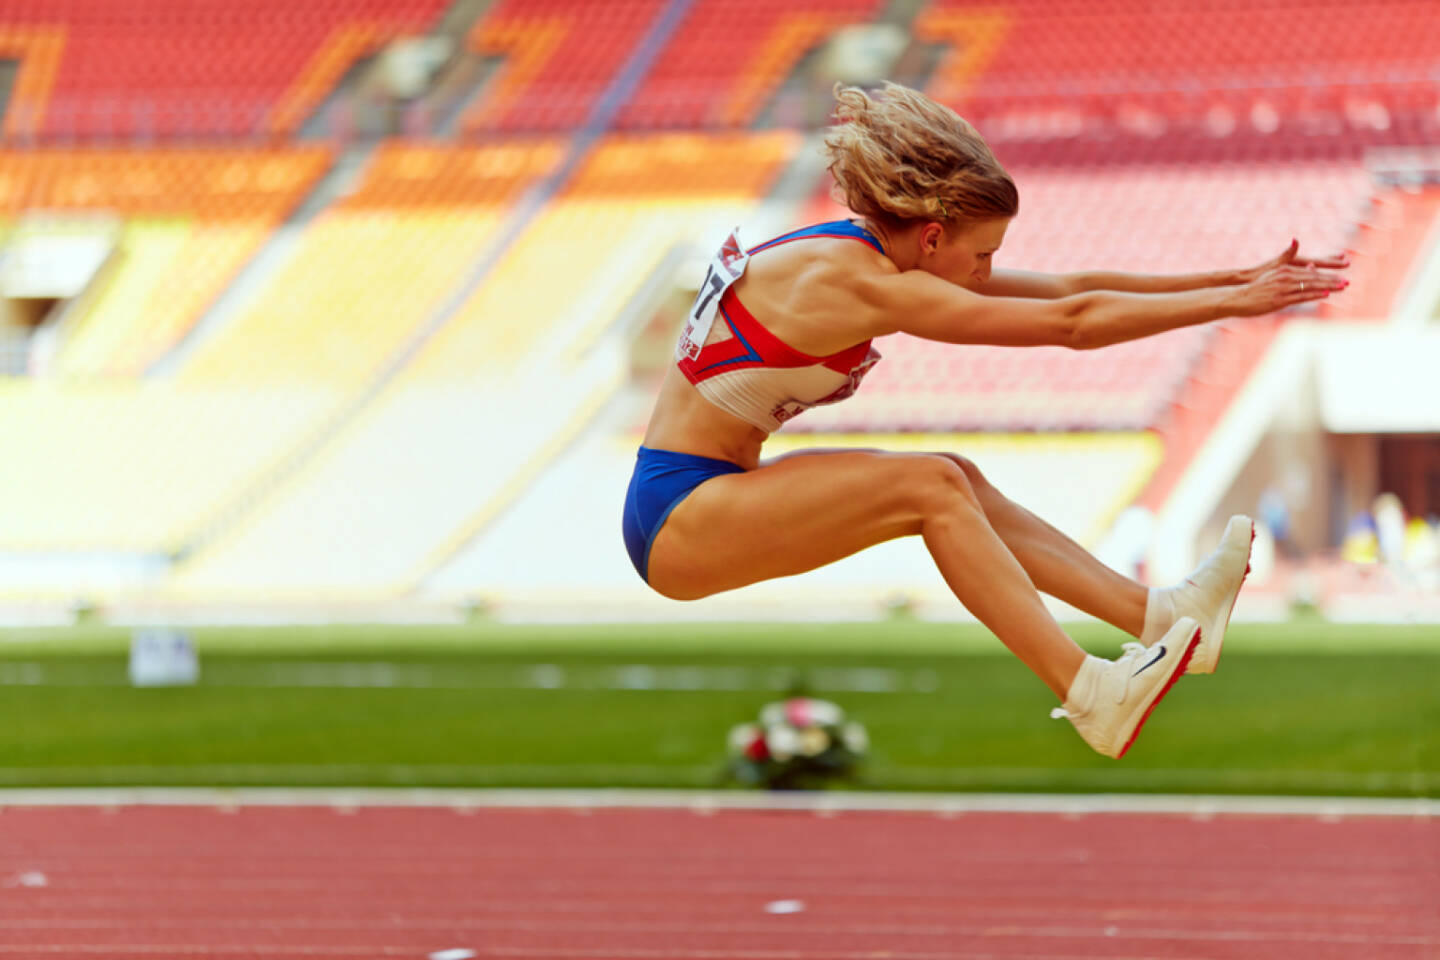 Weit, Landung, Weitsprung, nach vorne - http://www.shutterstock.com/de/pic-137773331/stock-photo-moscow-jun-female-athlete-makes-long-jump-at-grand-sports-arena-of-luzhniki-oc-during.html (c)  Pavel L Photo and Video